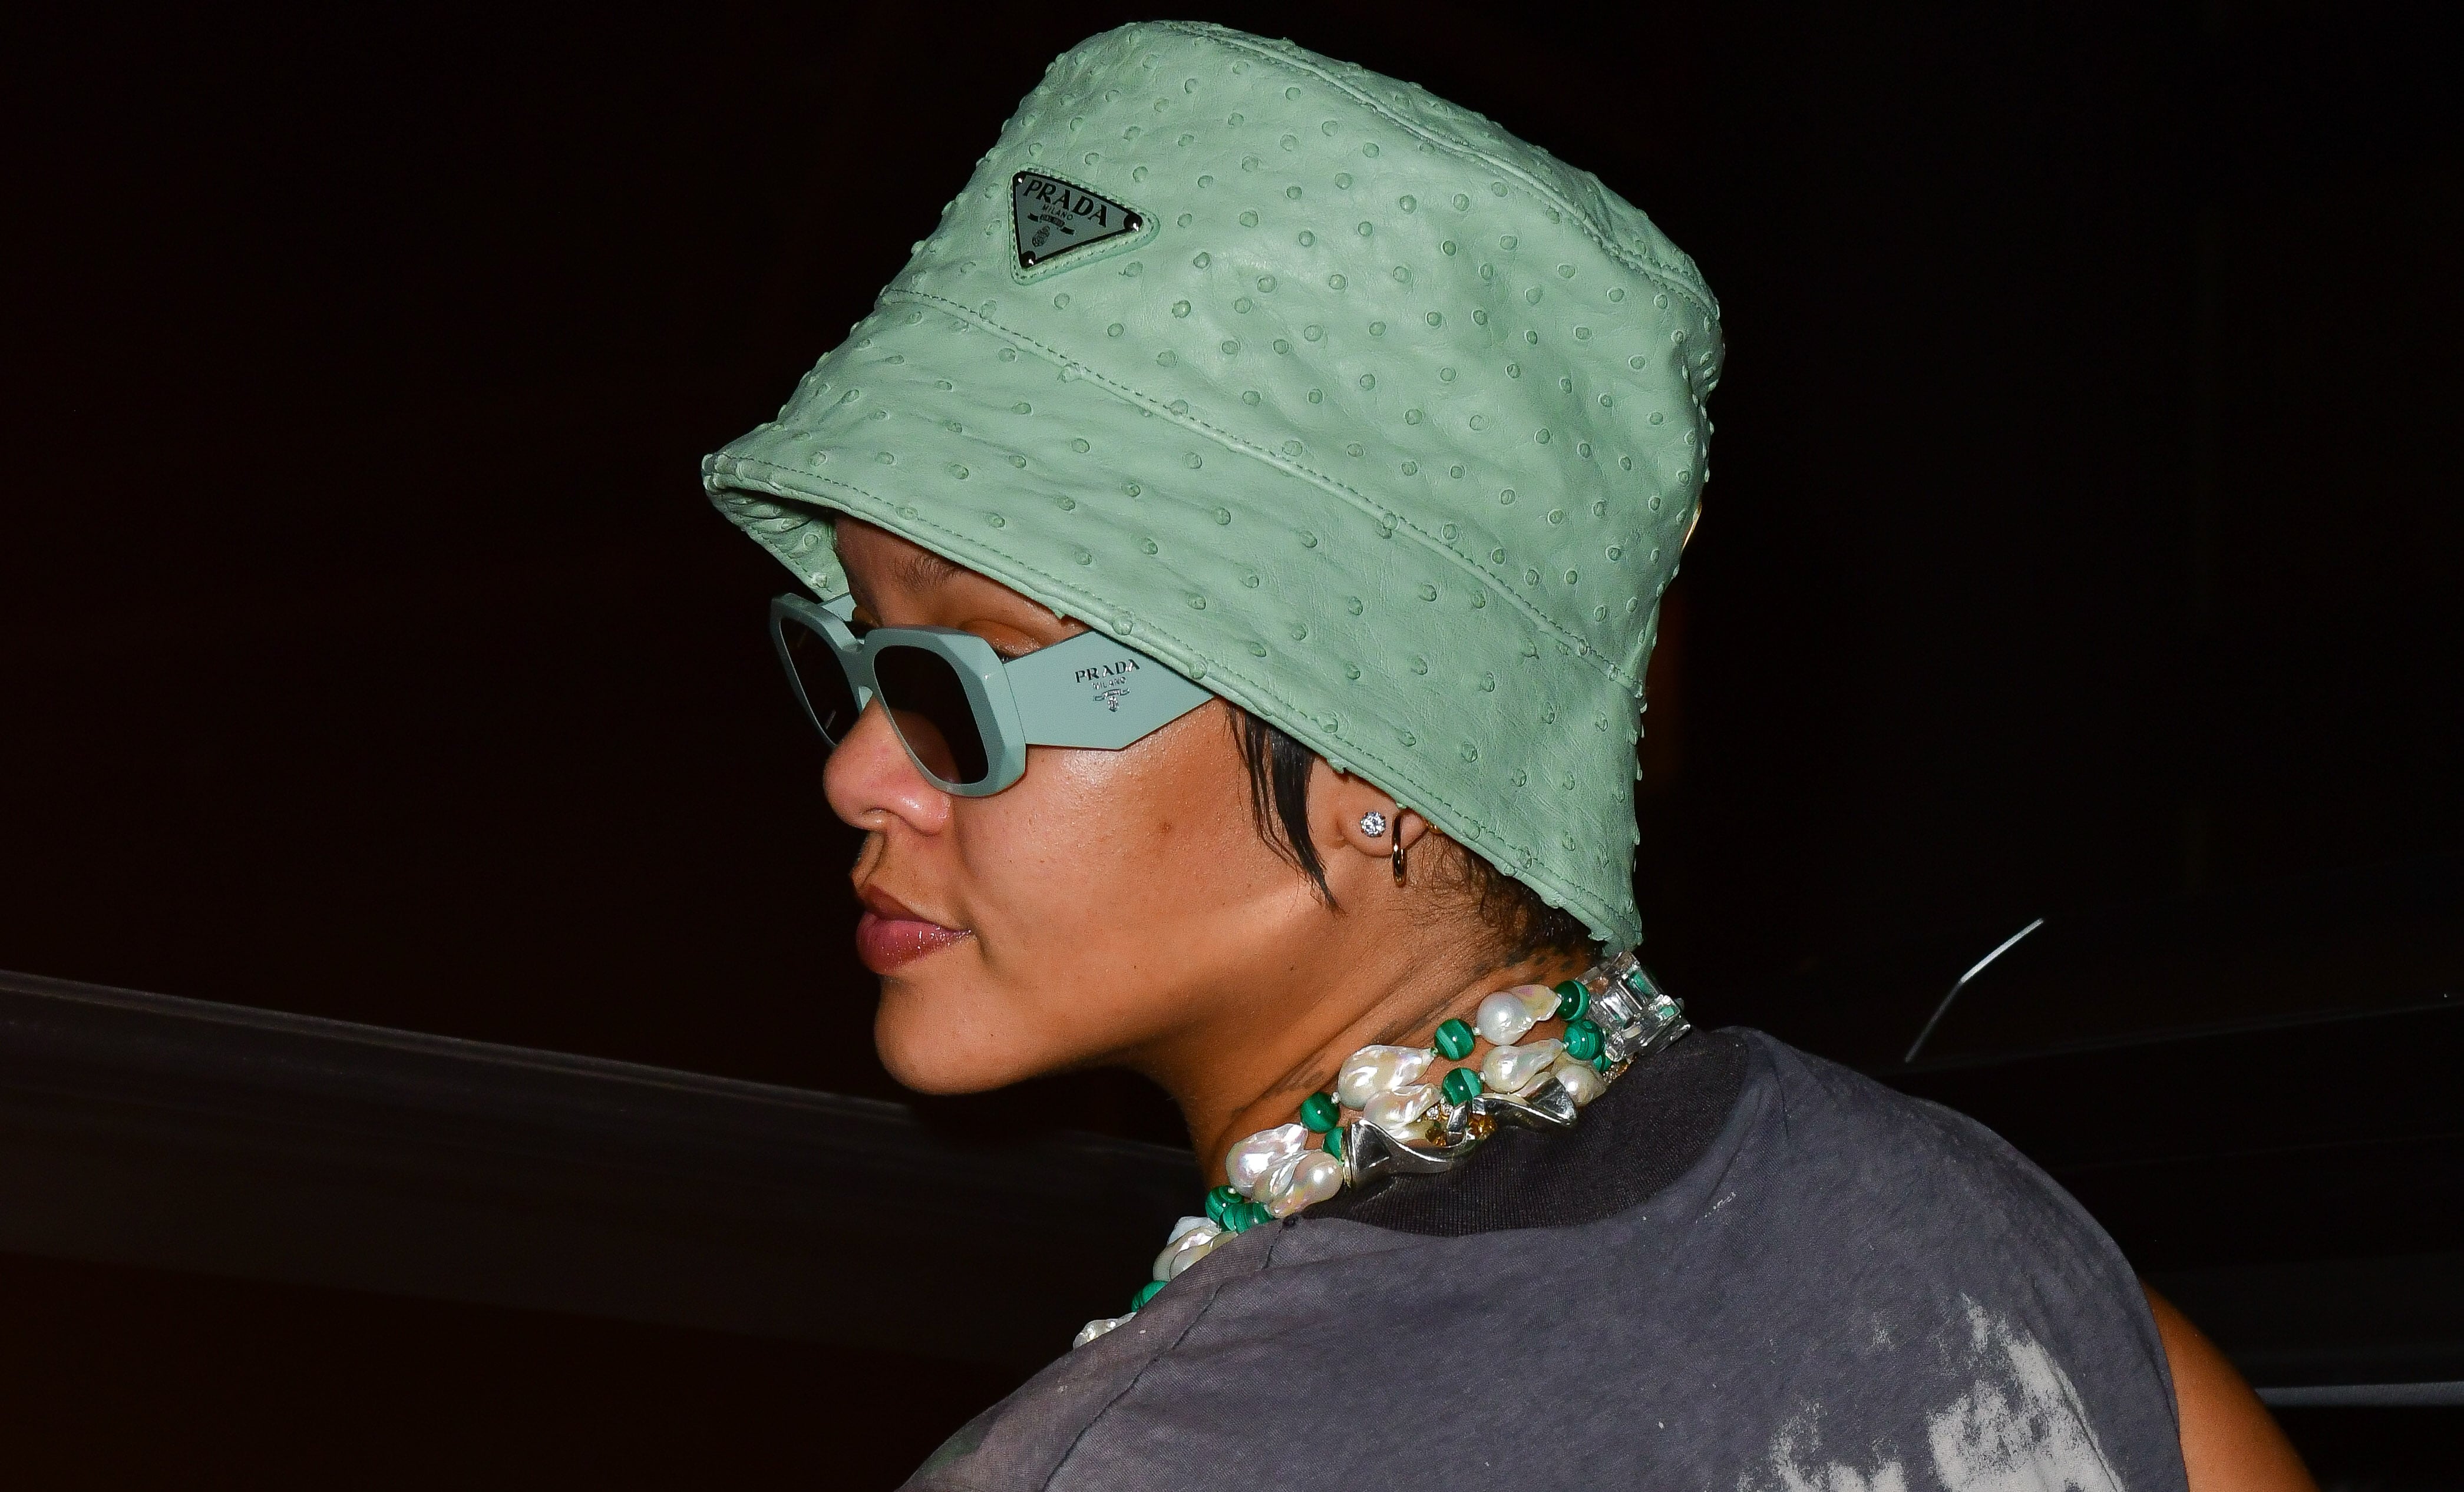 Rihanna Wore a $495 Mint Green Prada Bucket Hat on a Date With A